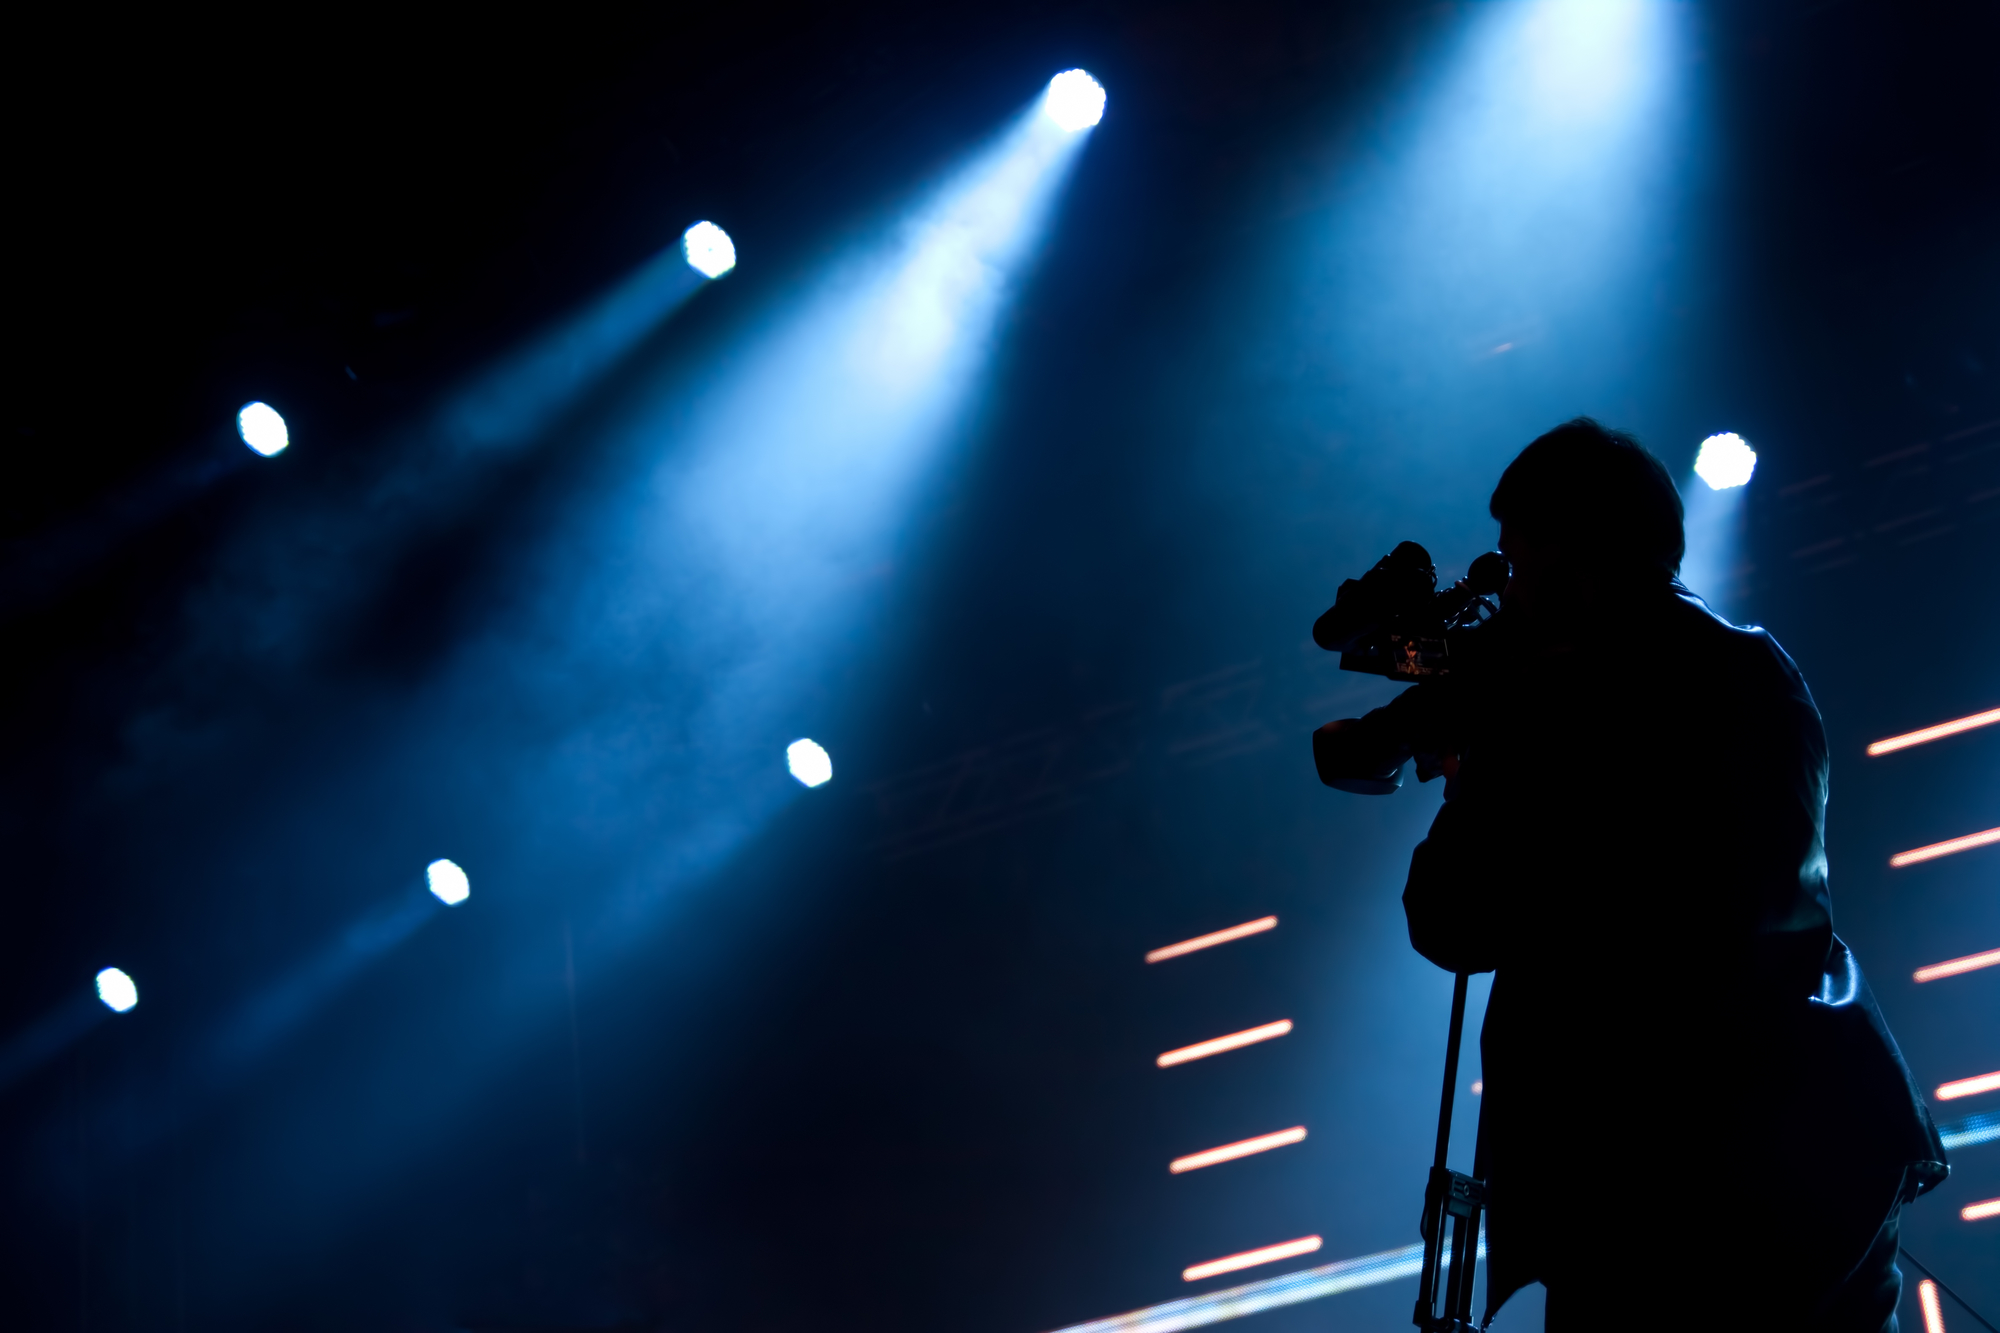 image of Cameraman silhouette on a concert stage